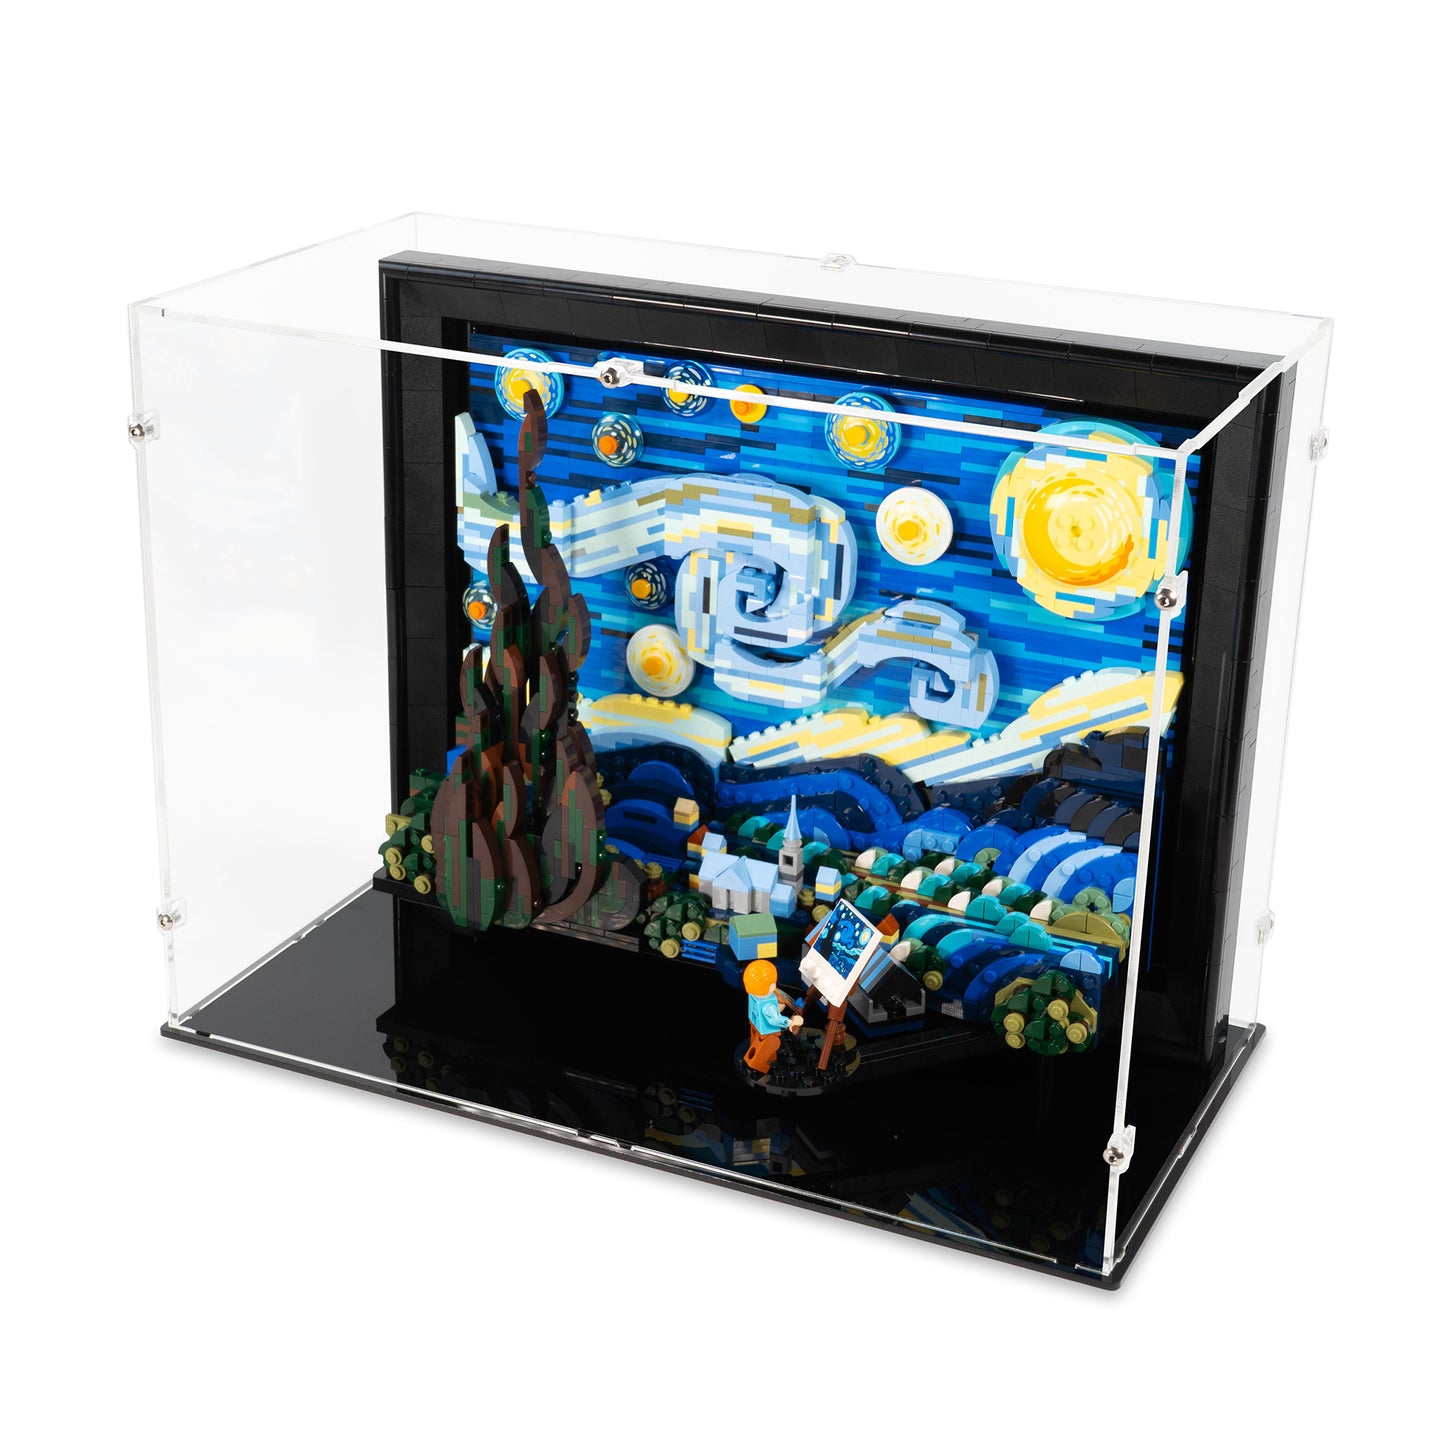 Angled top view of LEGO 21333 Vincent van Gogh The Starry Night Display Case.